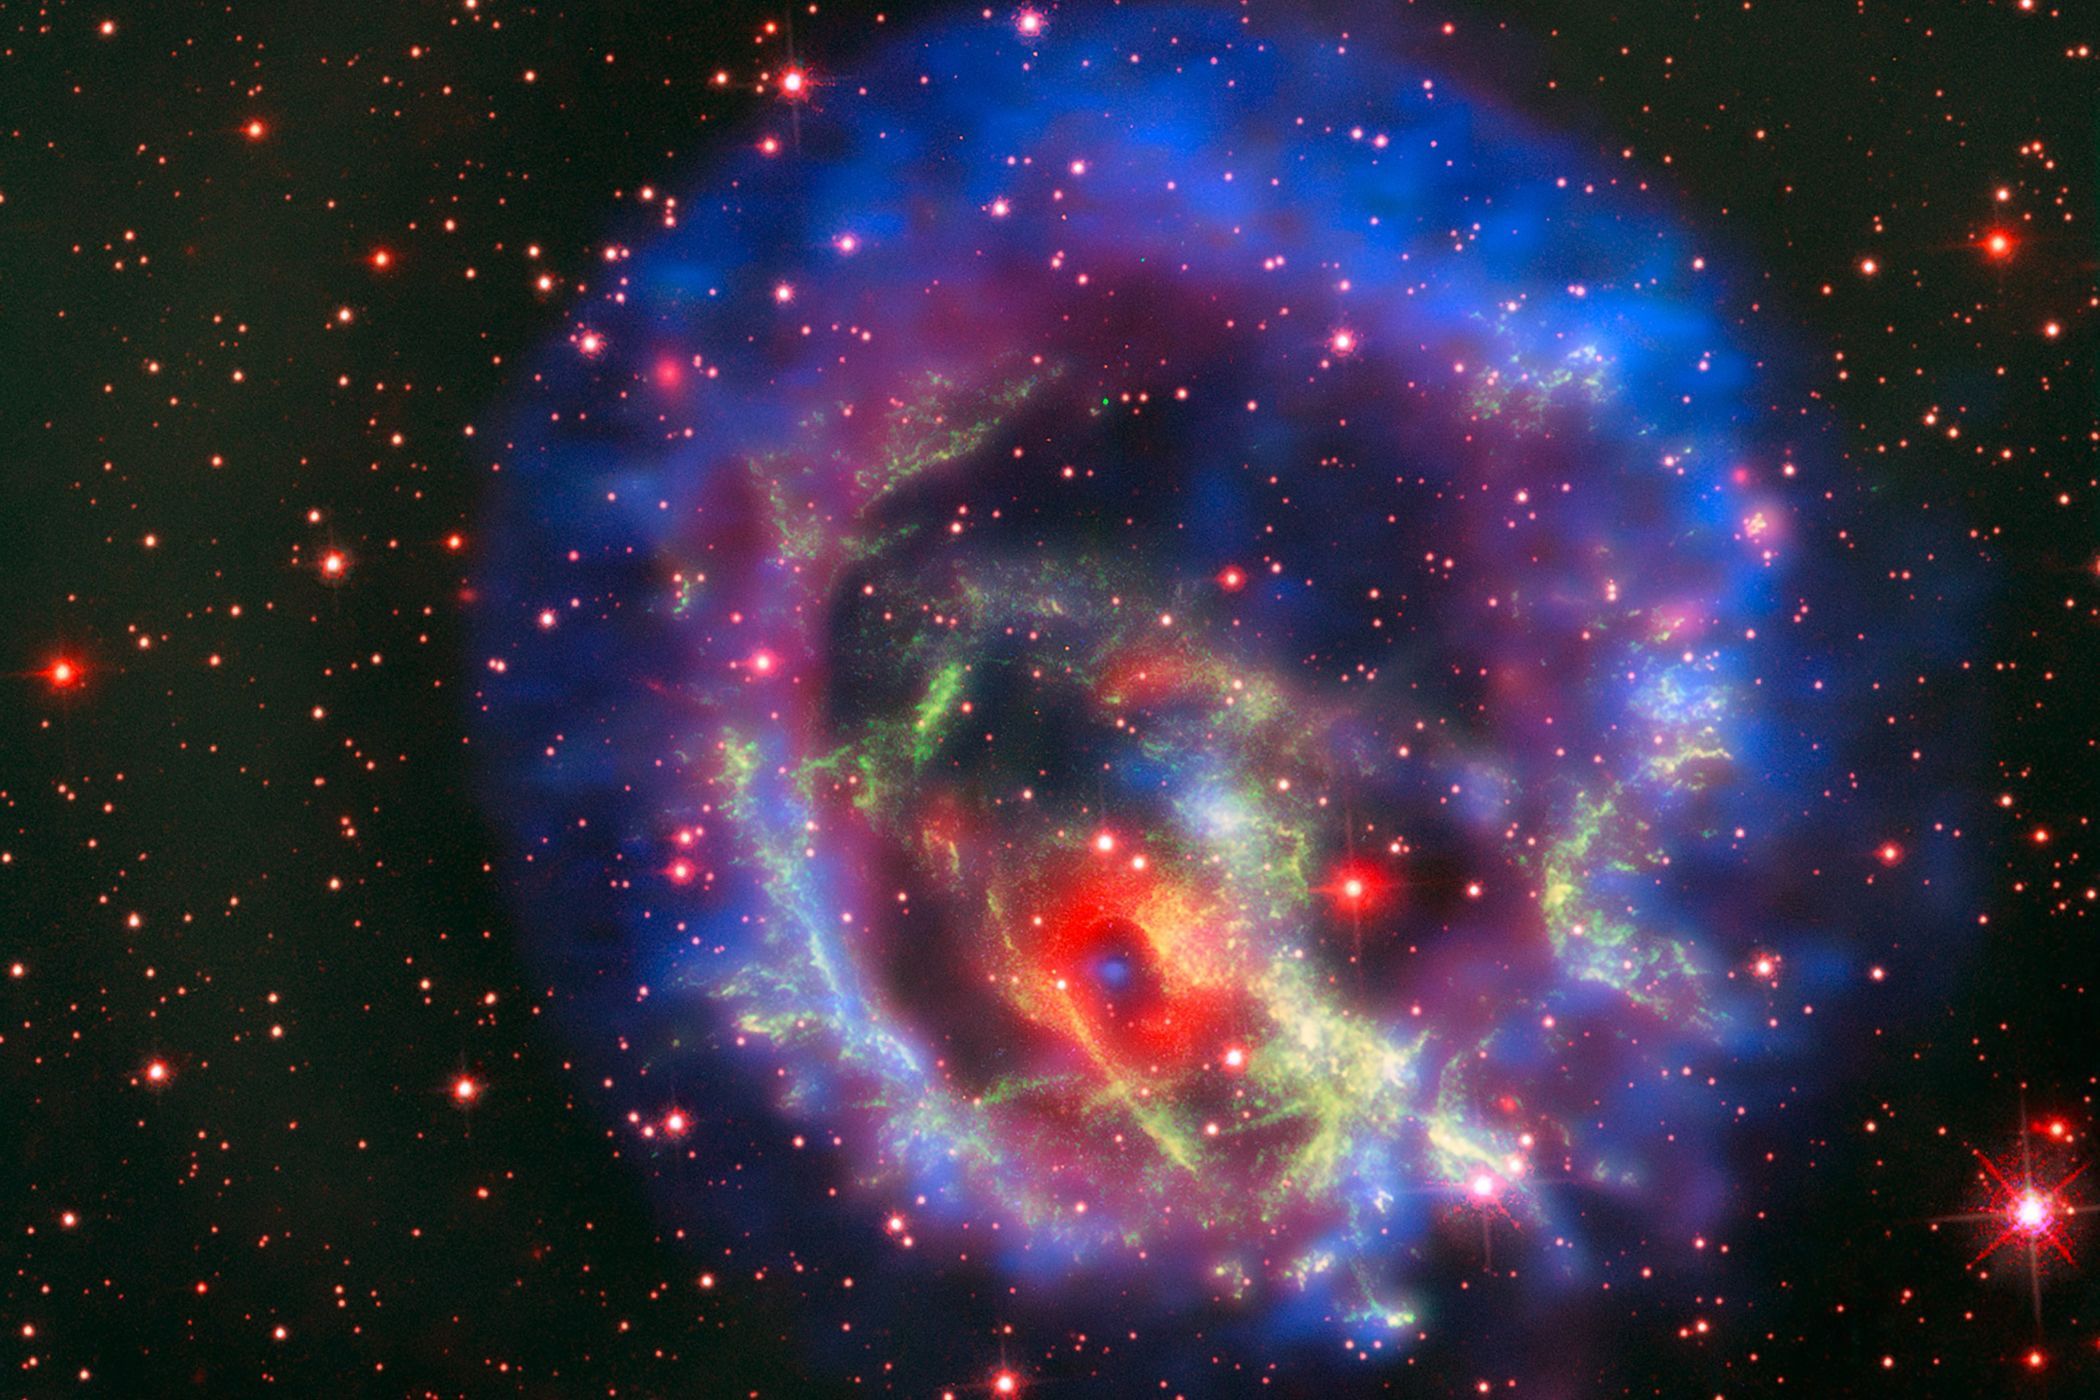 Telescope image of a lonely neutron star discovered outside the Milkway Galaxy.